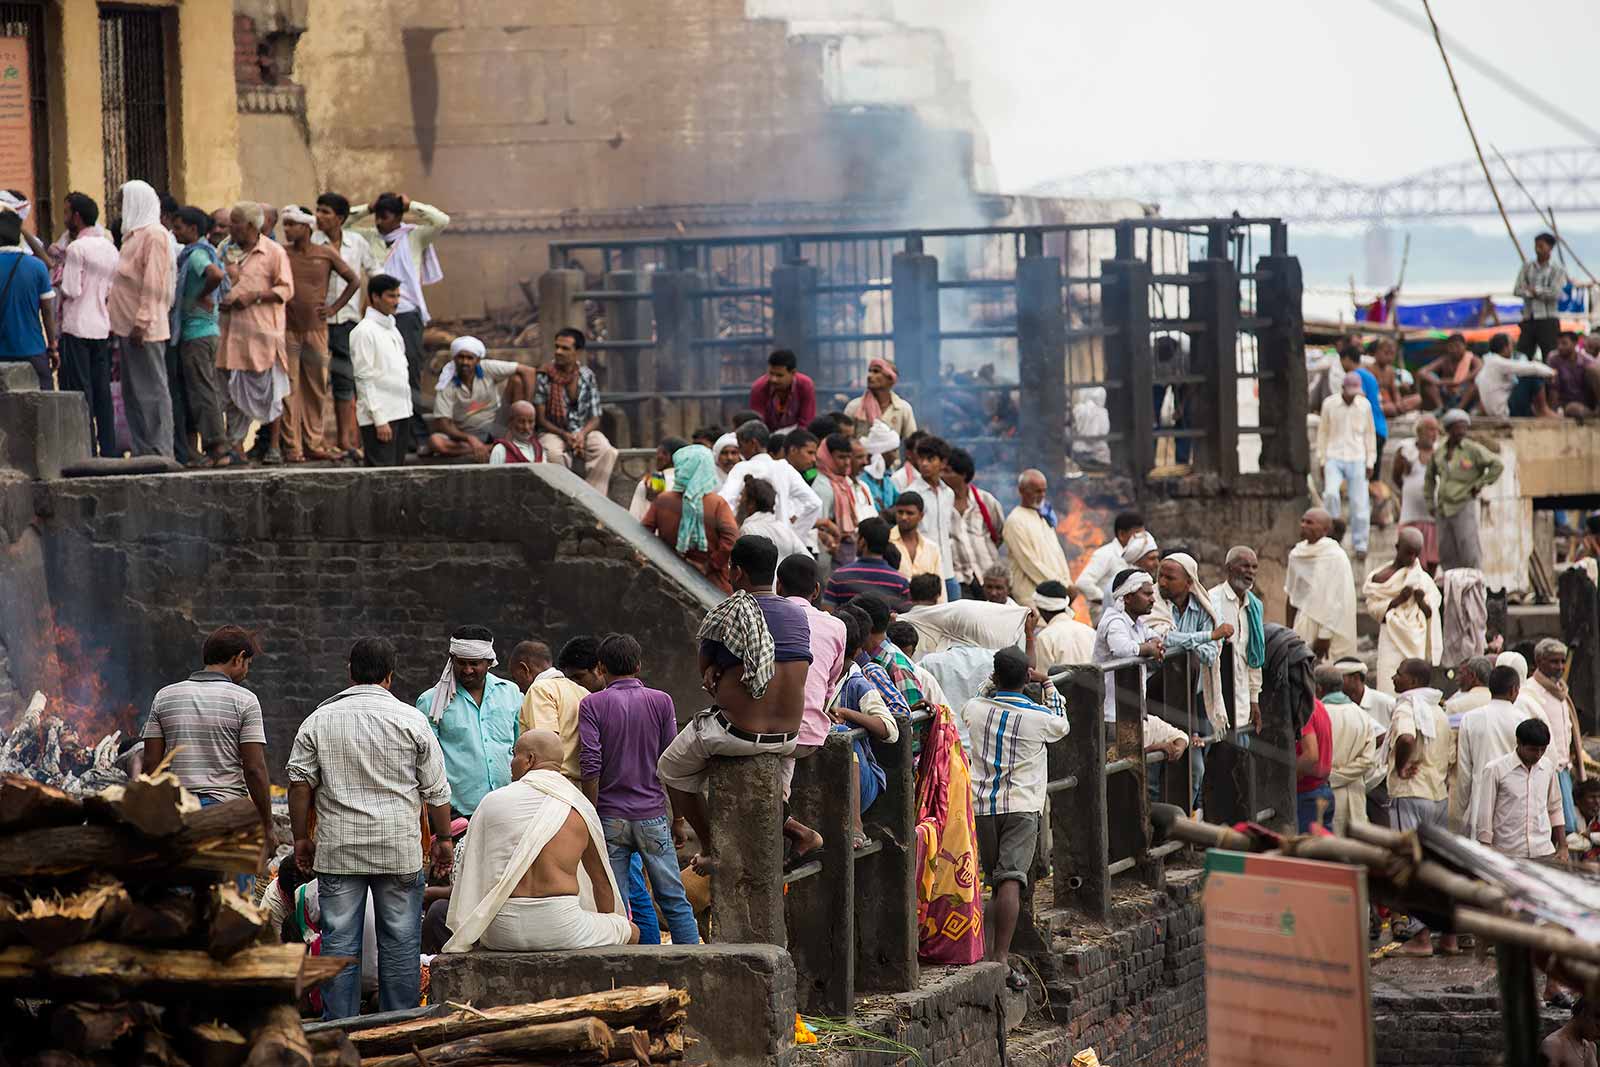 There is some resentment for tourists trespassing through the cremation ghats in Varanasi. You can take photographs from a distance, but you shouldn't come too close out of respect.